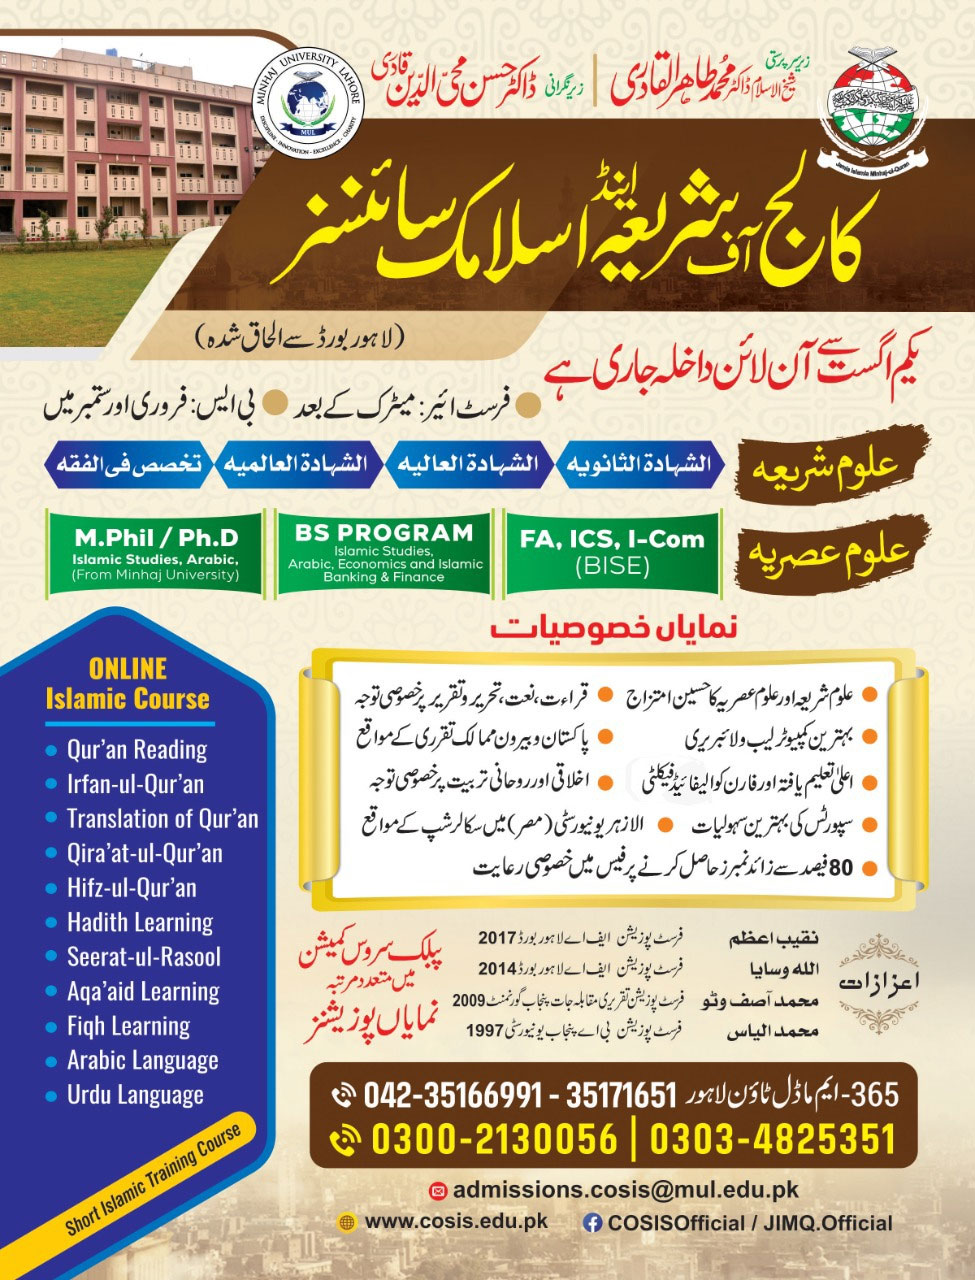 College of Sharia Admission